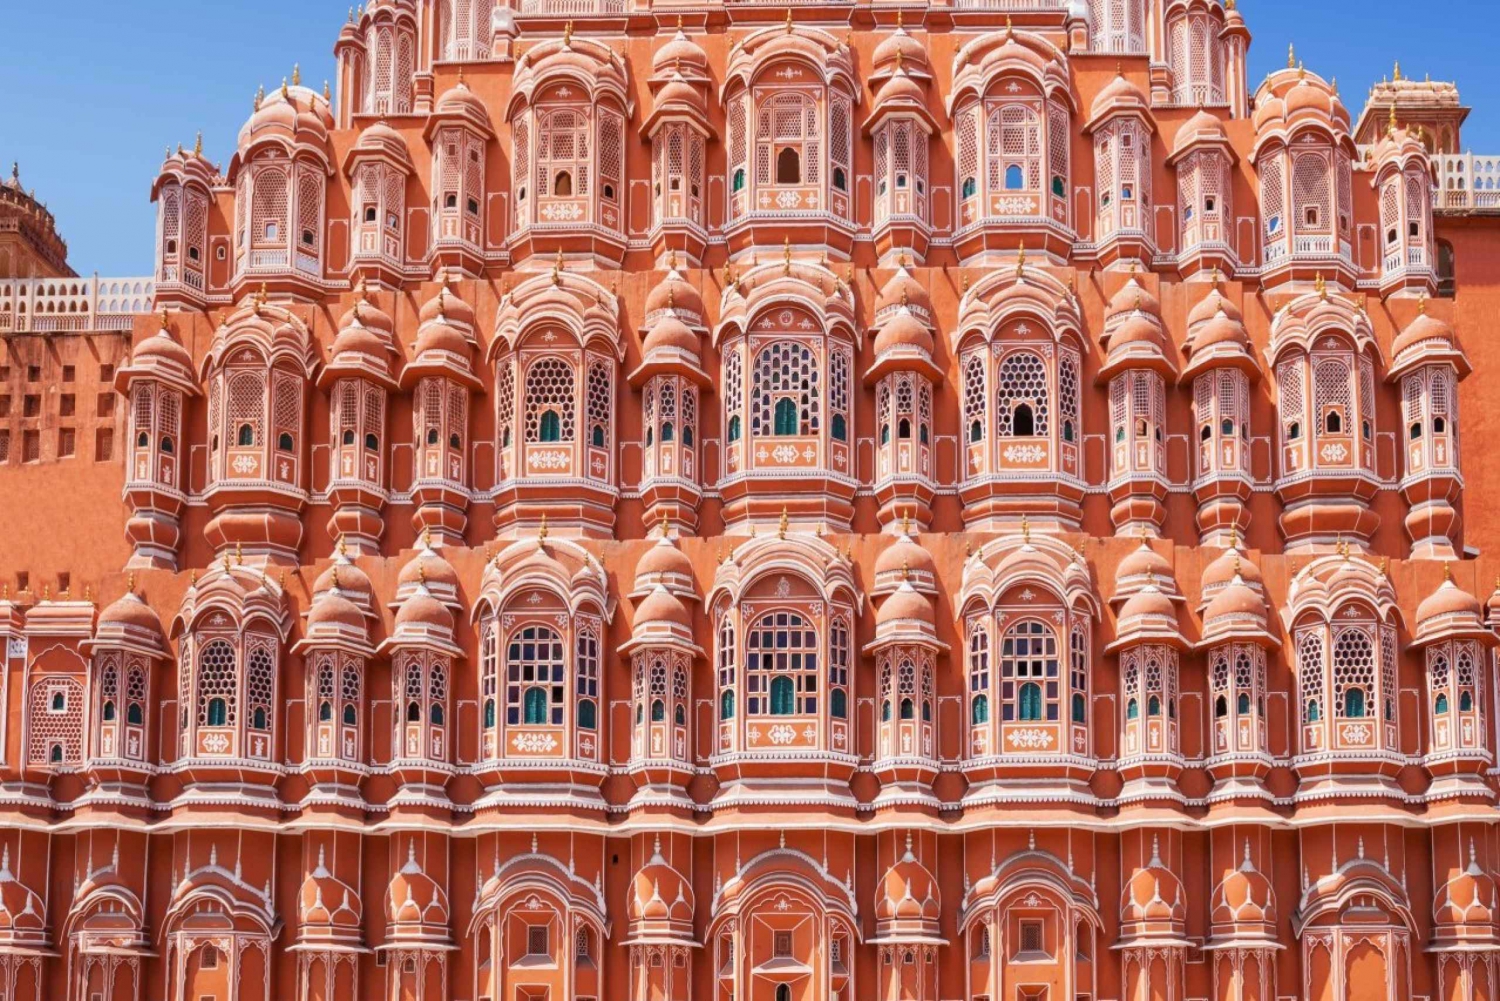 From New Delhi: 3 Day Golden Triangle Tour